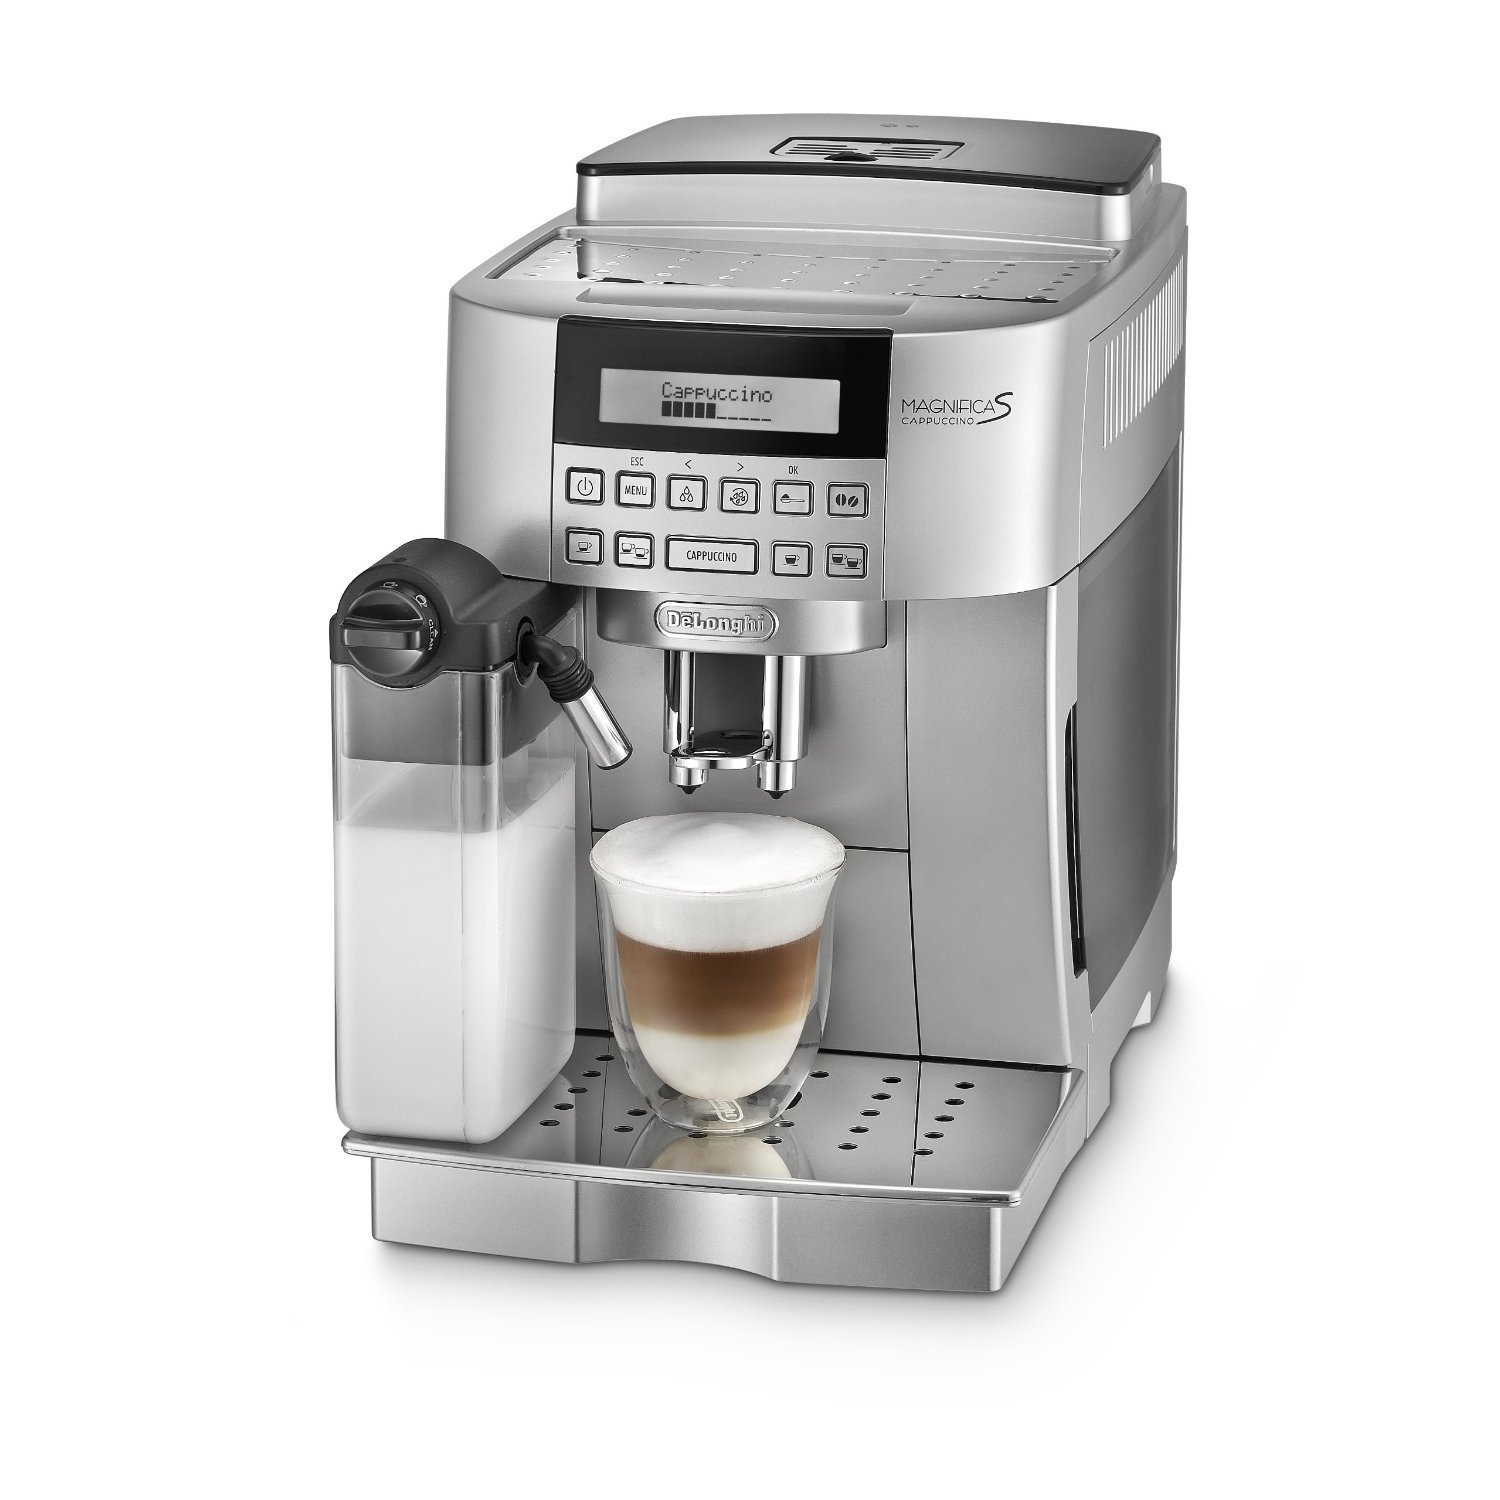 DeLonghi Fully Automatic Bean to Cup Coffee Machine 220W Model ECAM22.360.S | 1 Year Full Warranty